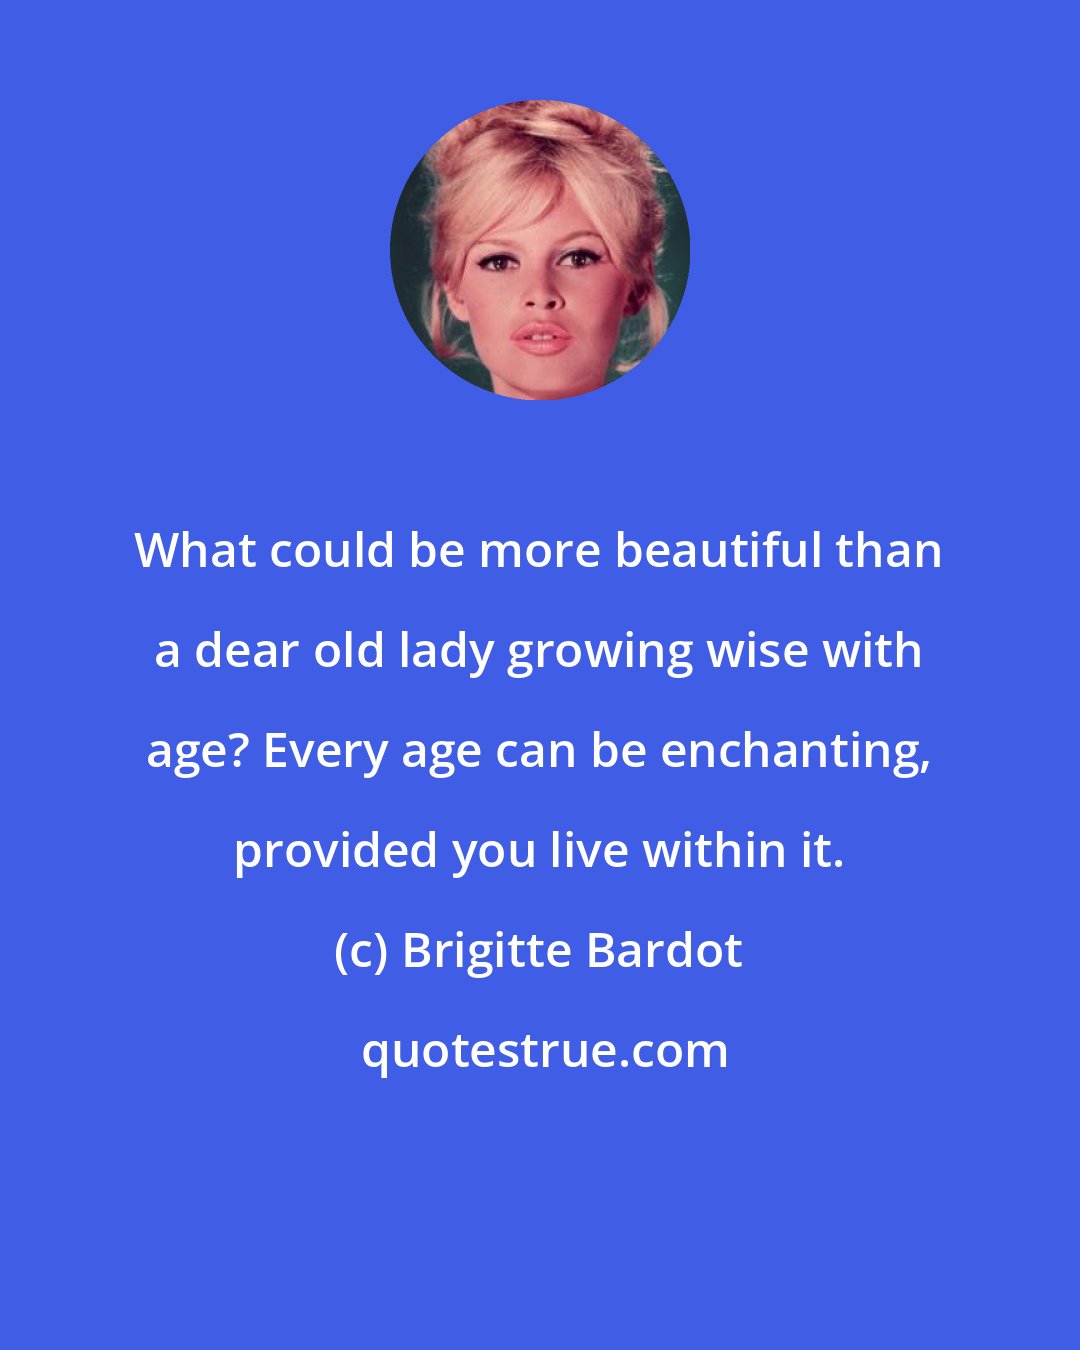 Brigitte Bardot: What could be more beautiful than a dear old lady growing wise with age? Every age can be enchanting, provided you live within it.